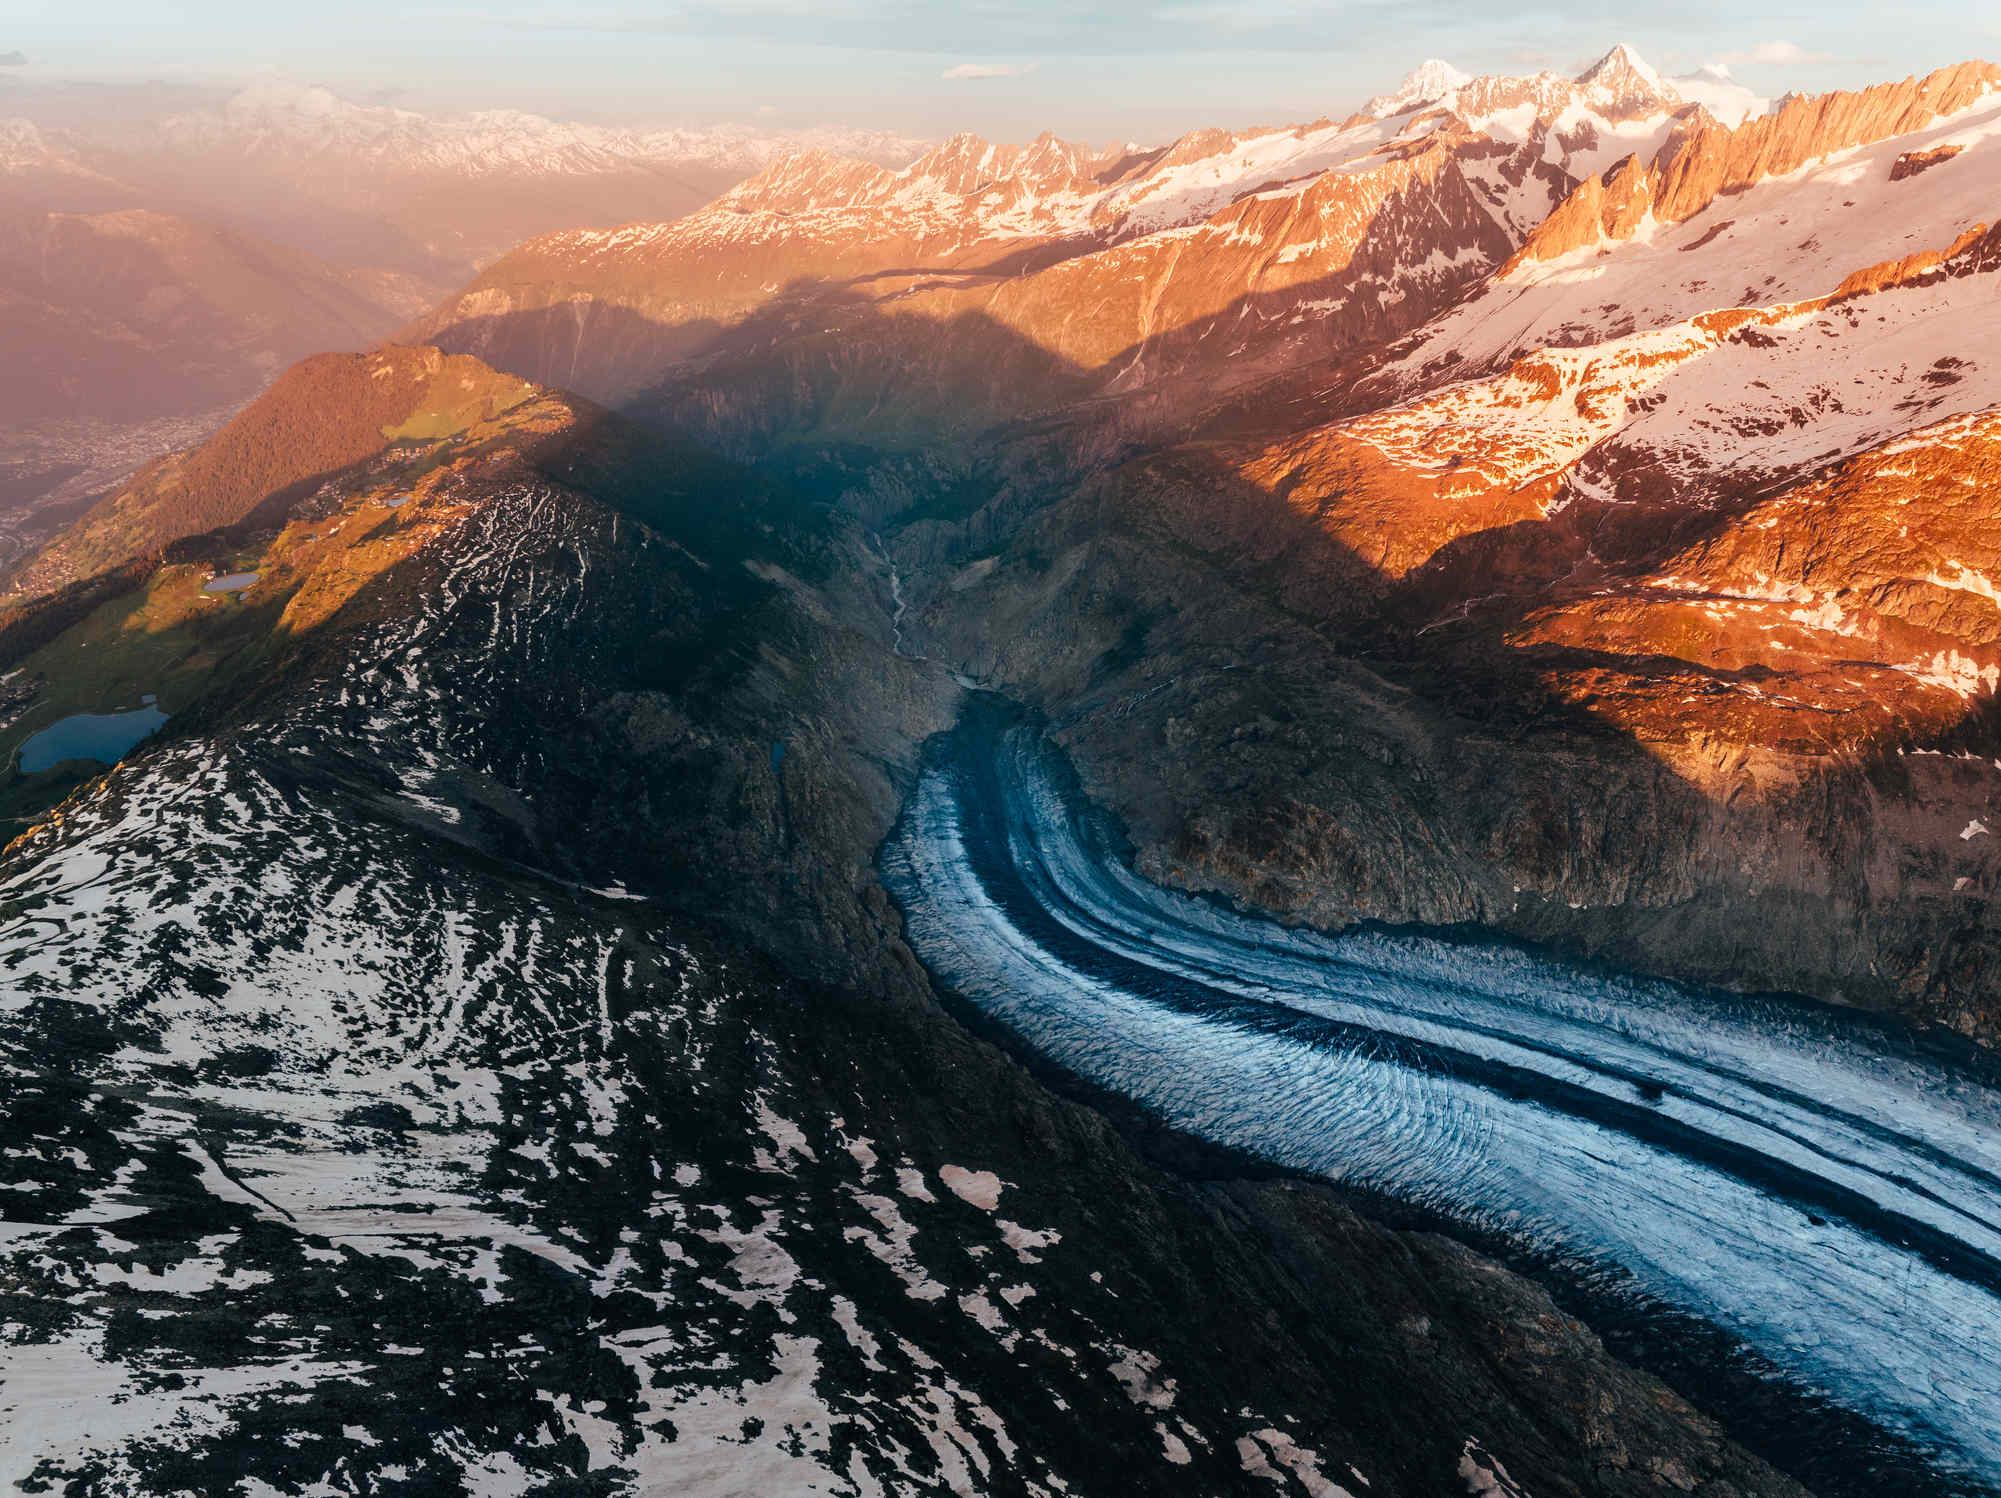 Sunrise over the mountains and a glacier in Switzerland